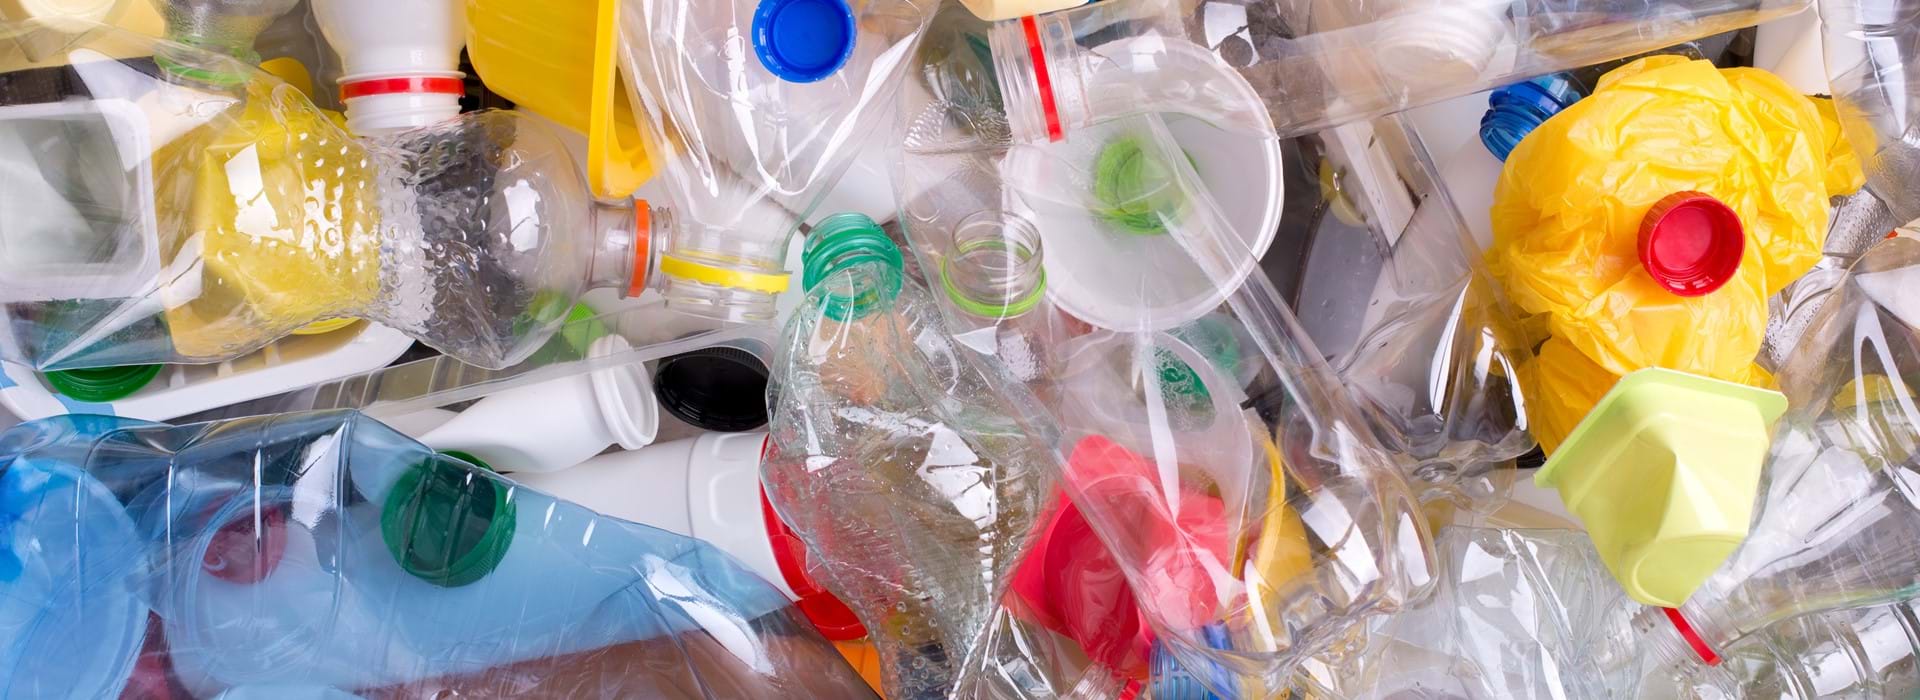 Appeal to investors: drastic measures to reduce plastic use by companies